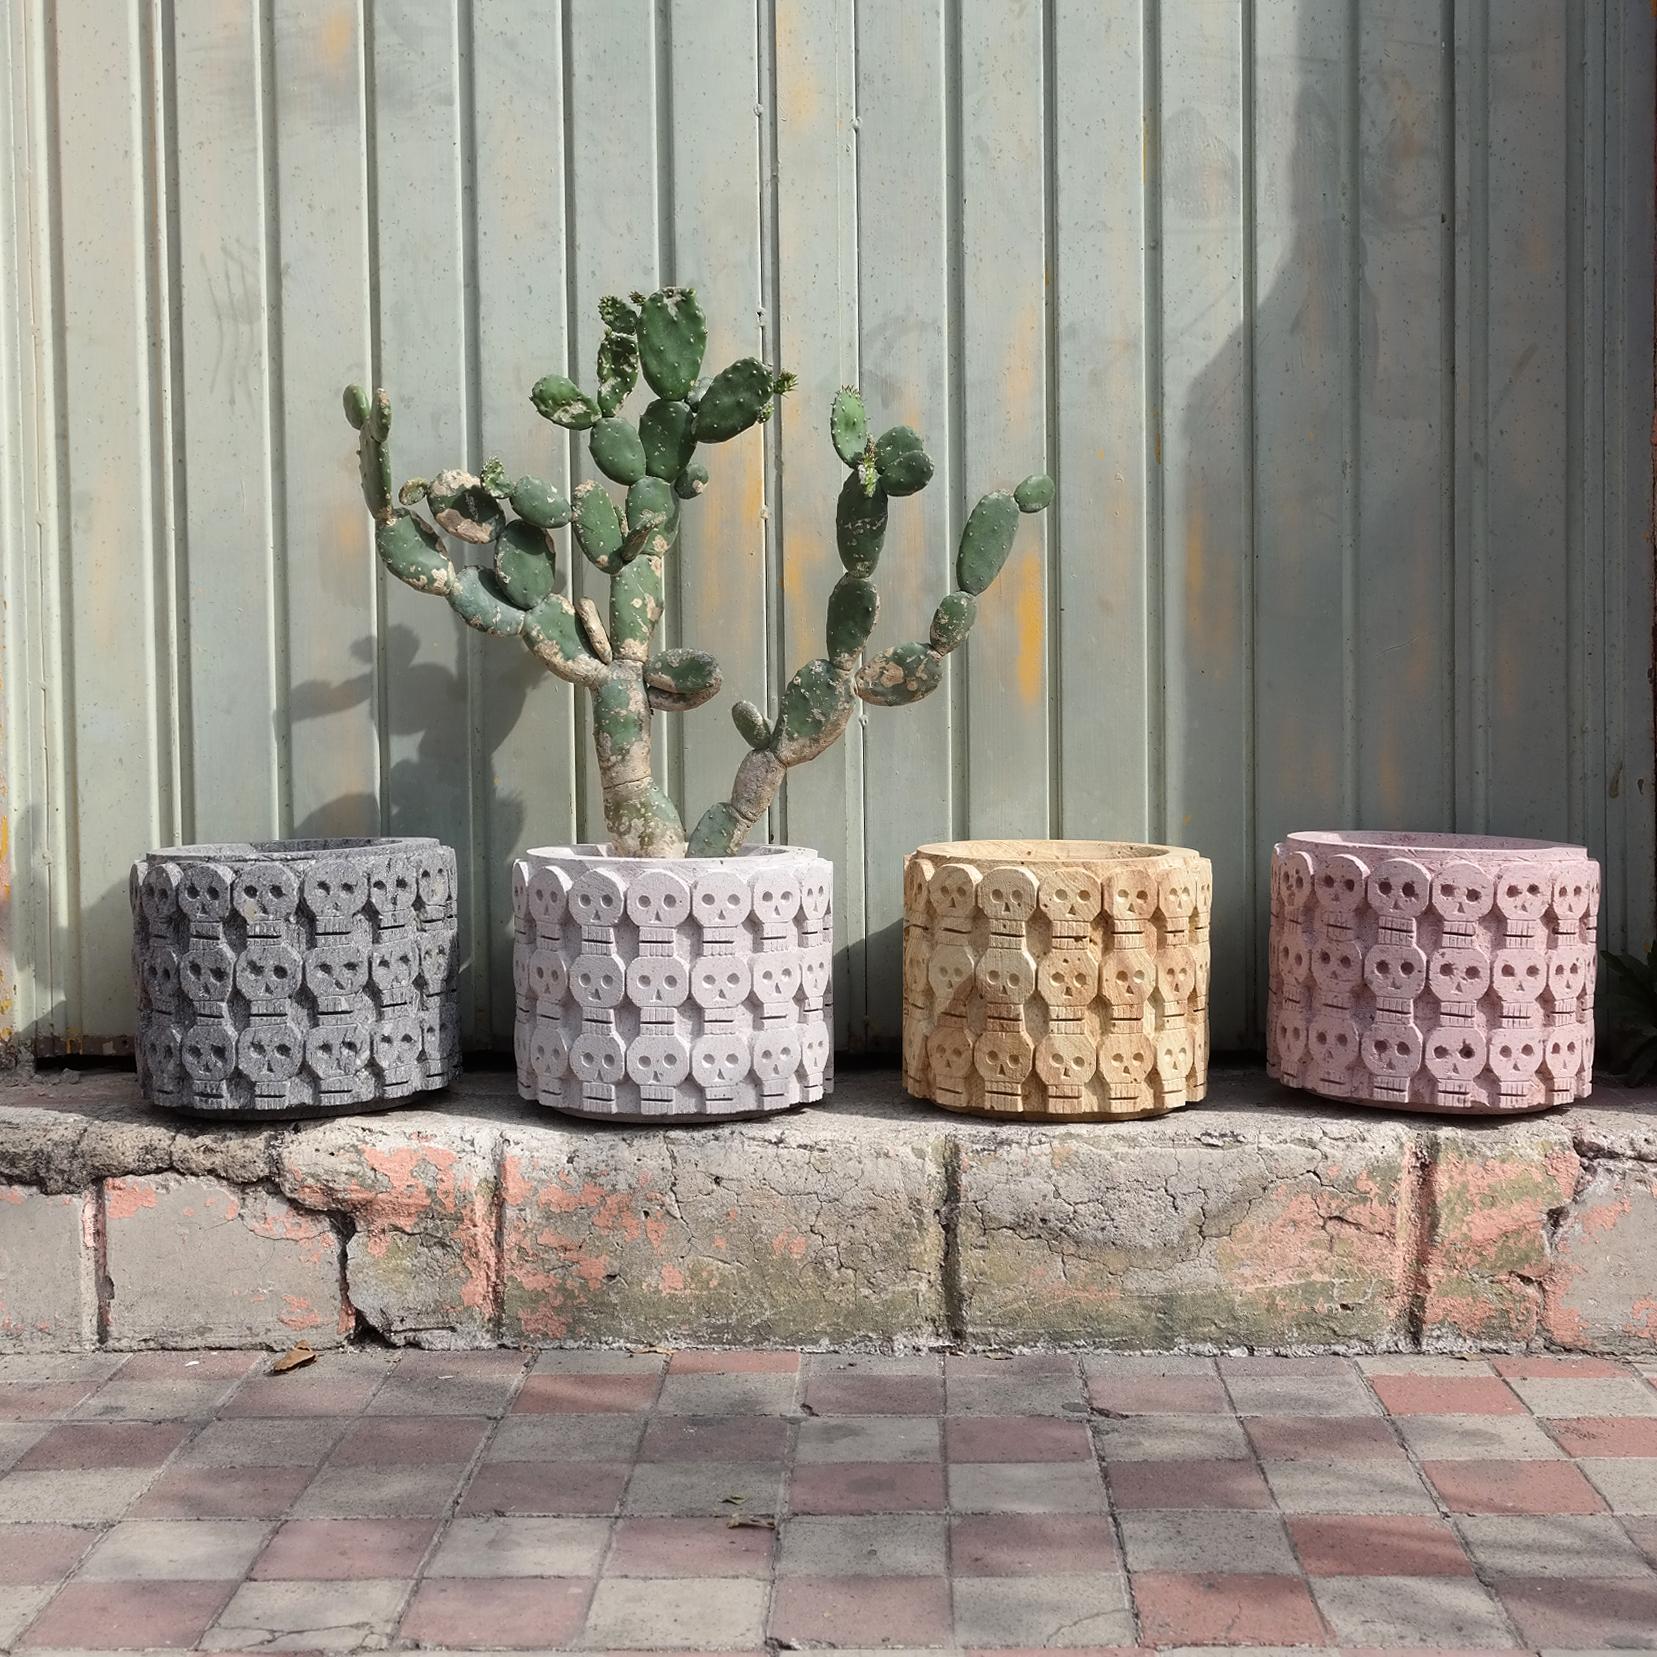 Tzom planters are inspired by the tzompantli, a type of wall built across different cultures during the Pre-Columbian period. These walls would be covered in carved (or often real) skulls and provide protection to sacred sites.
Cantera is a type of